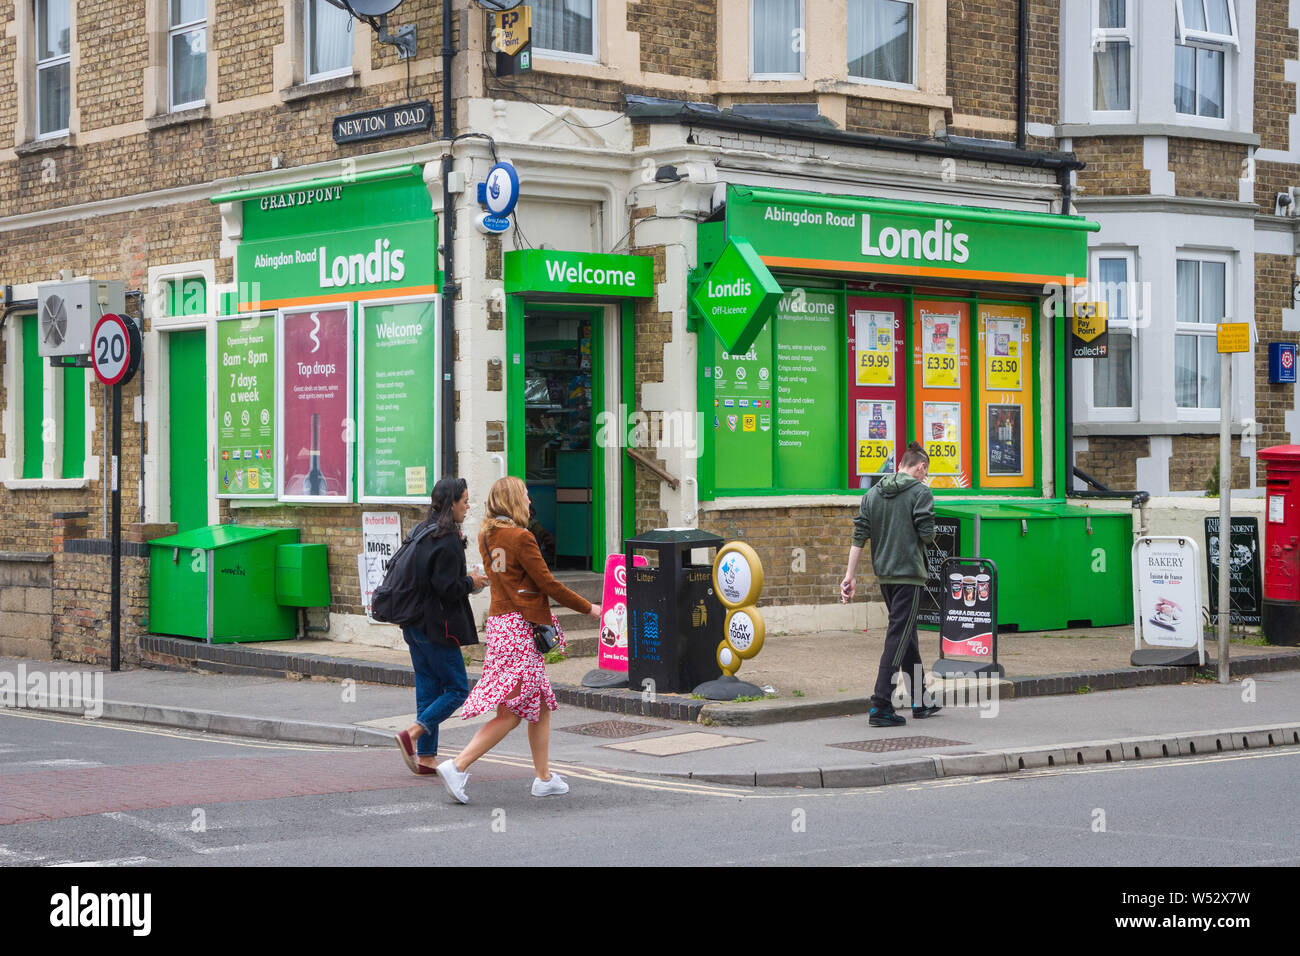 A Londis corner shop in Oxford Stock Photo